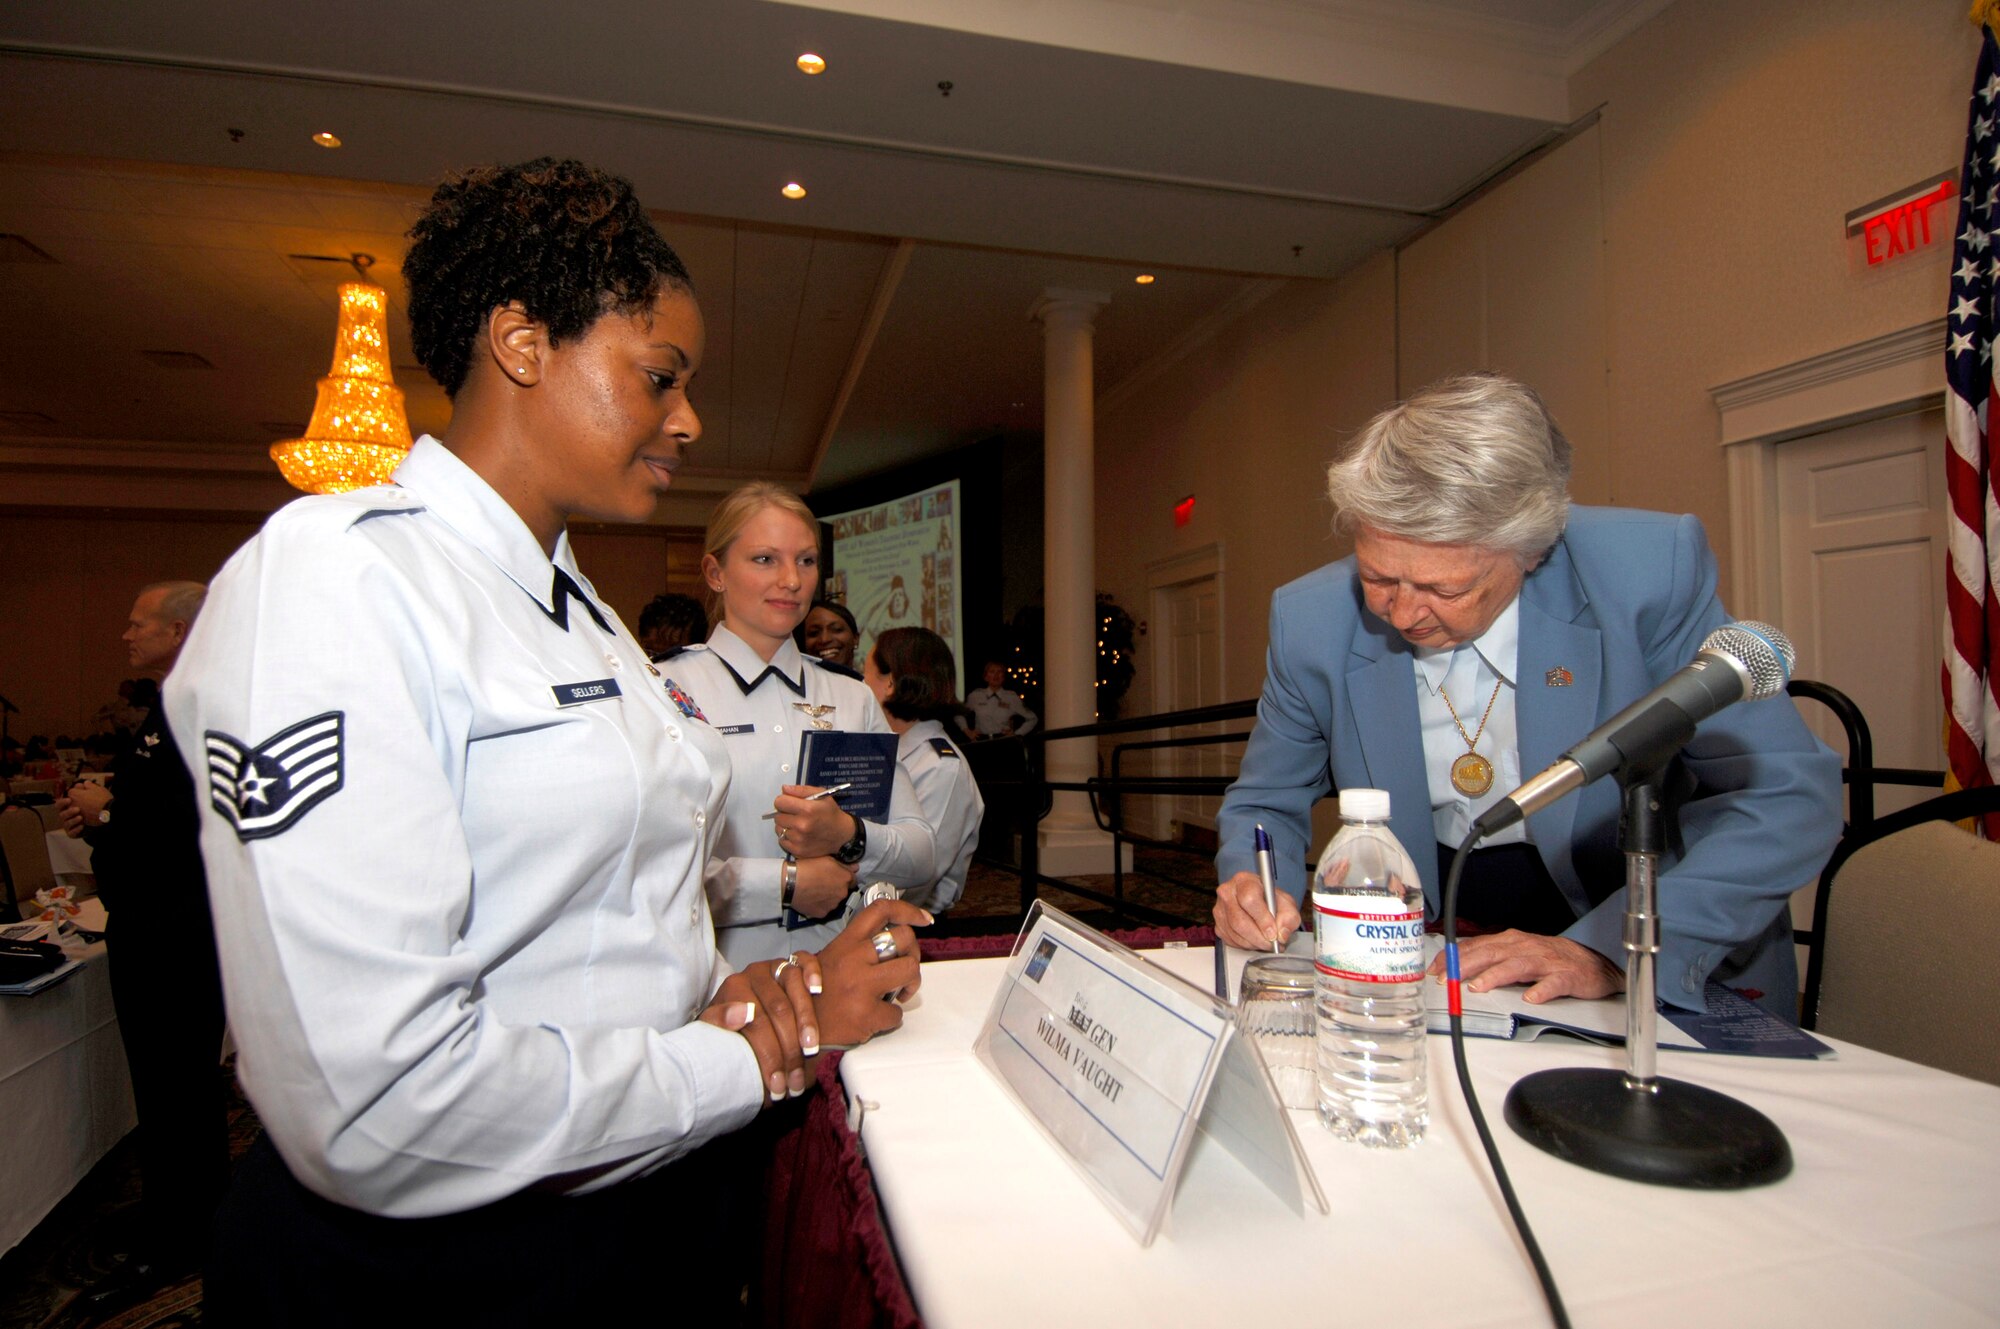 Brig. Gen. Wilma Vaught, signs a book for  Staff Sgt. Nina Sellers at the 2007 Air Force Heritage to Horizon Women's Training Symposium in Springfield, Va., Oct. 31. (U.S. Air Force photo/Staff Sgt. Suzanne M. Day)